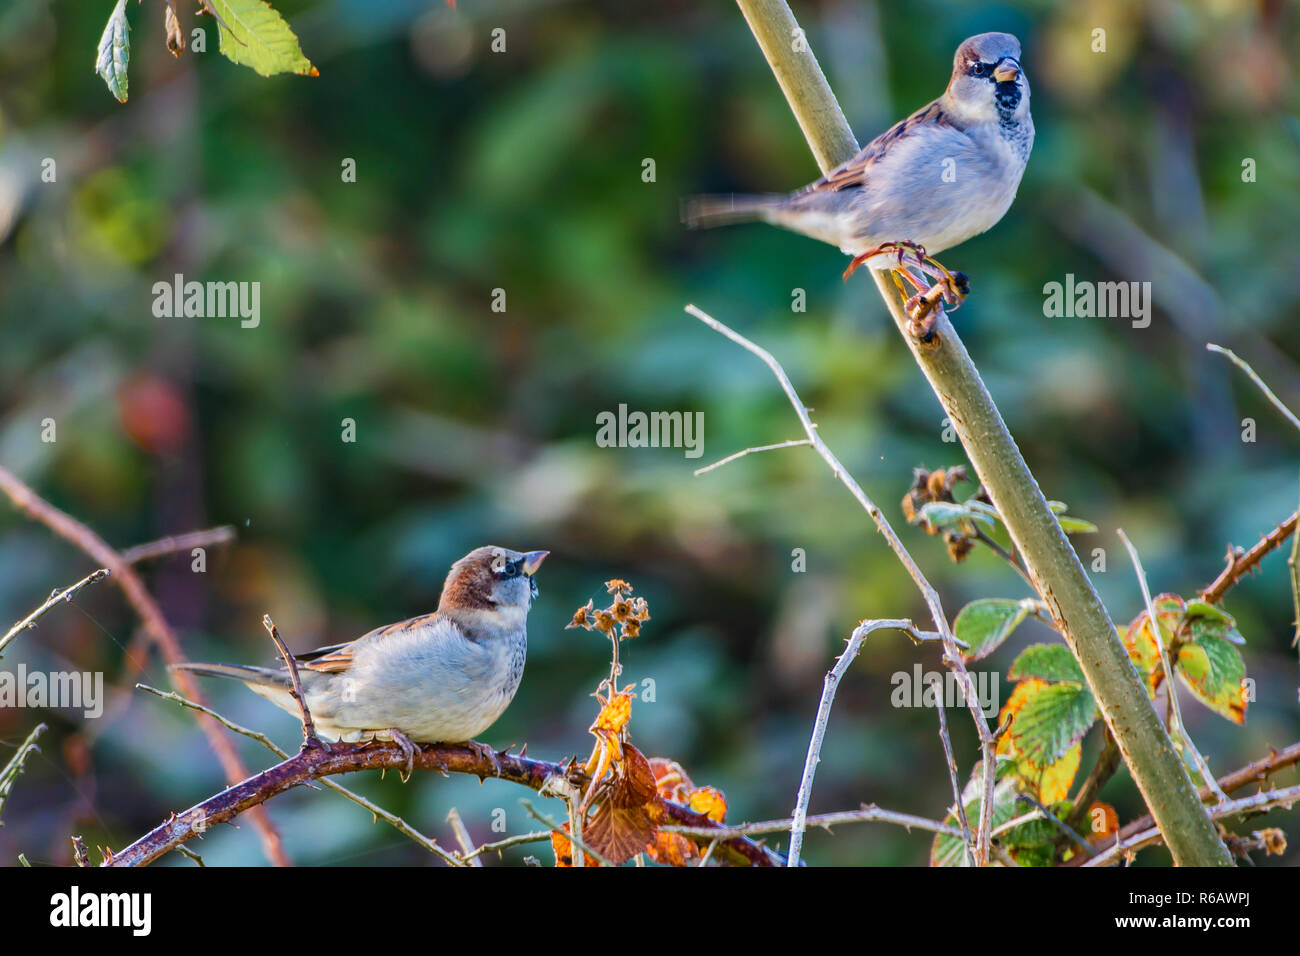 House Sparrow, Passer domesticus, perched in bush Stock Photo